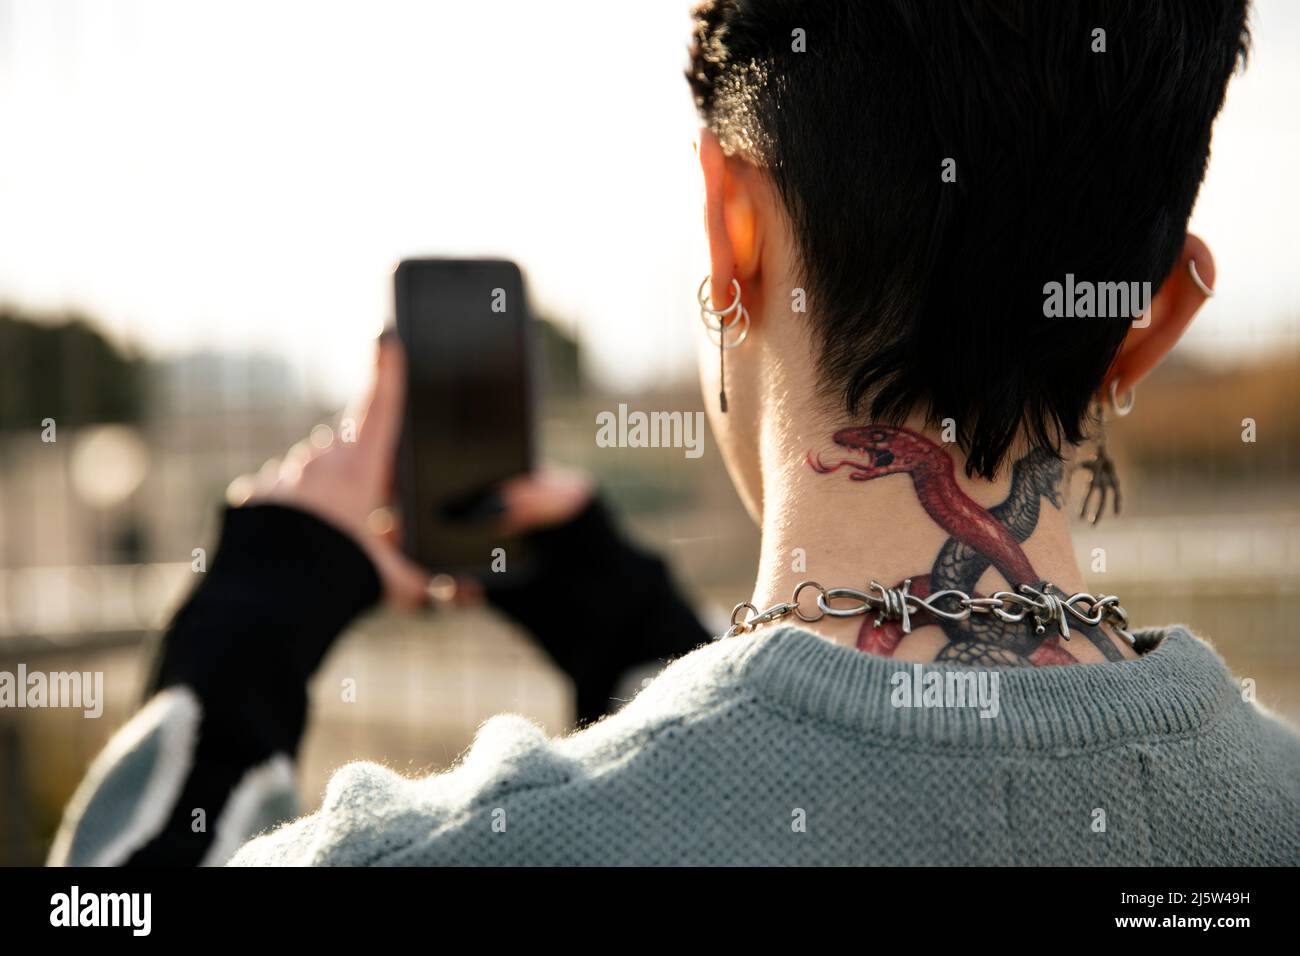 Unrecognizable girl with a tattoo taking a picture Stock Photo